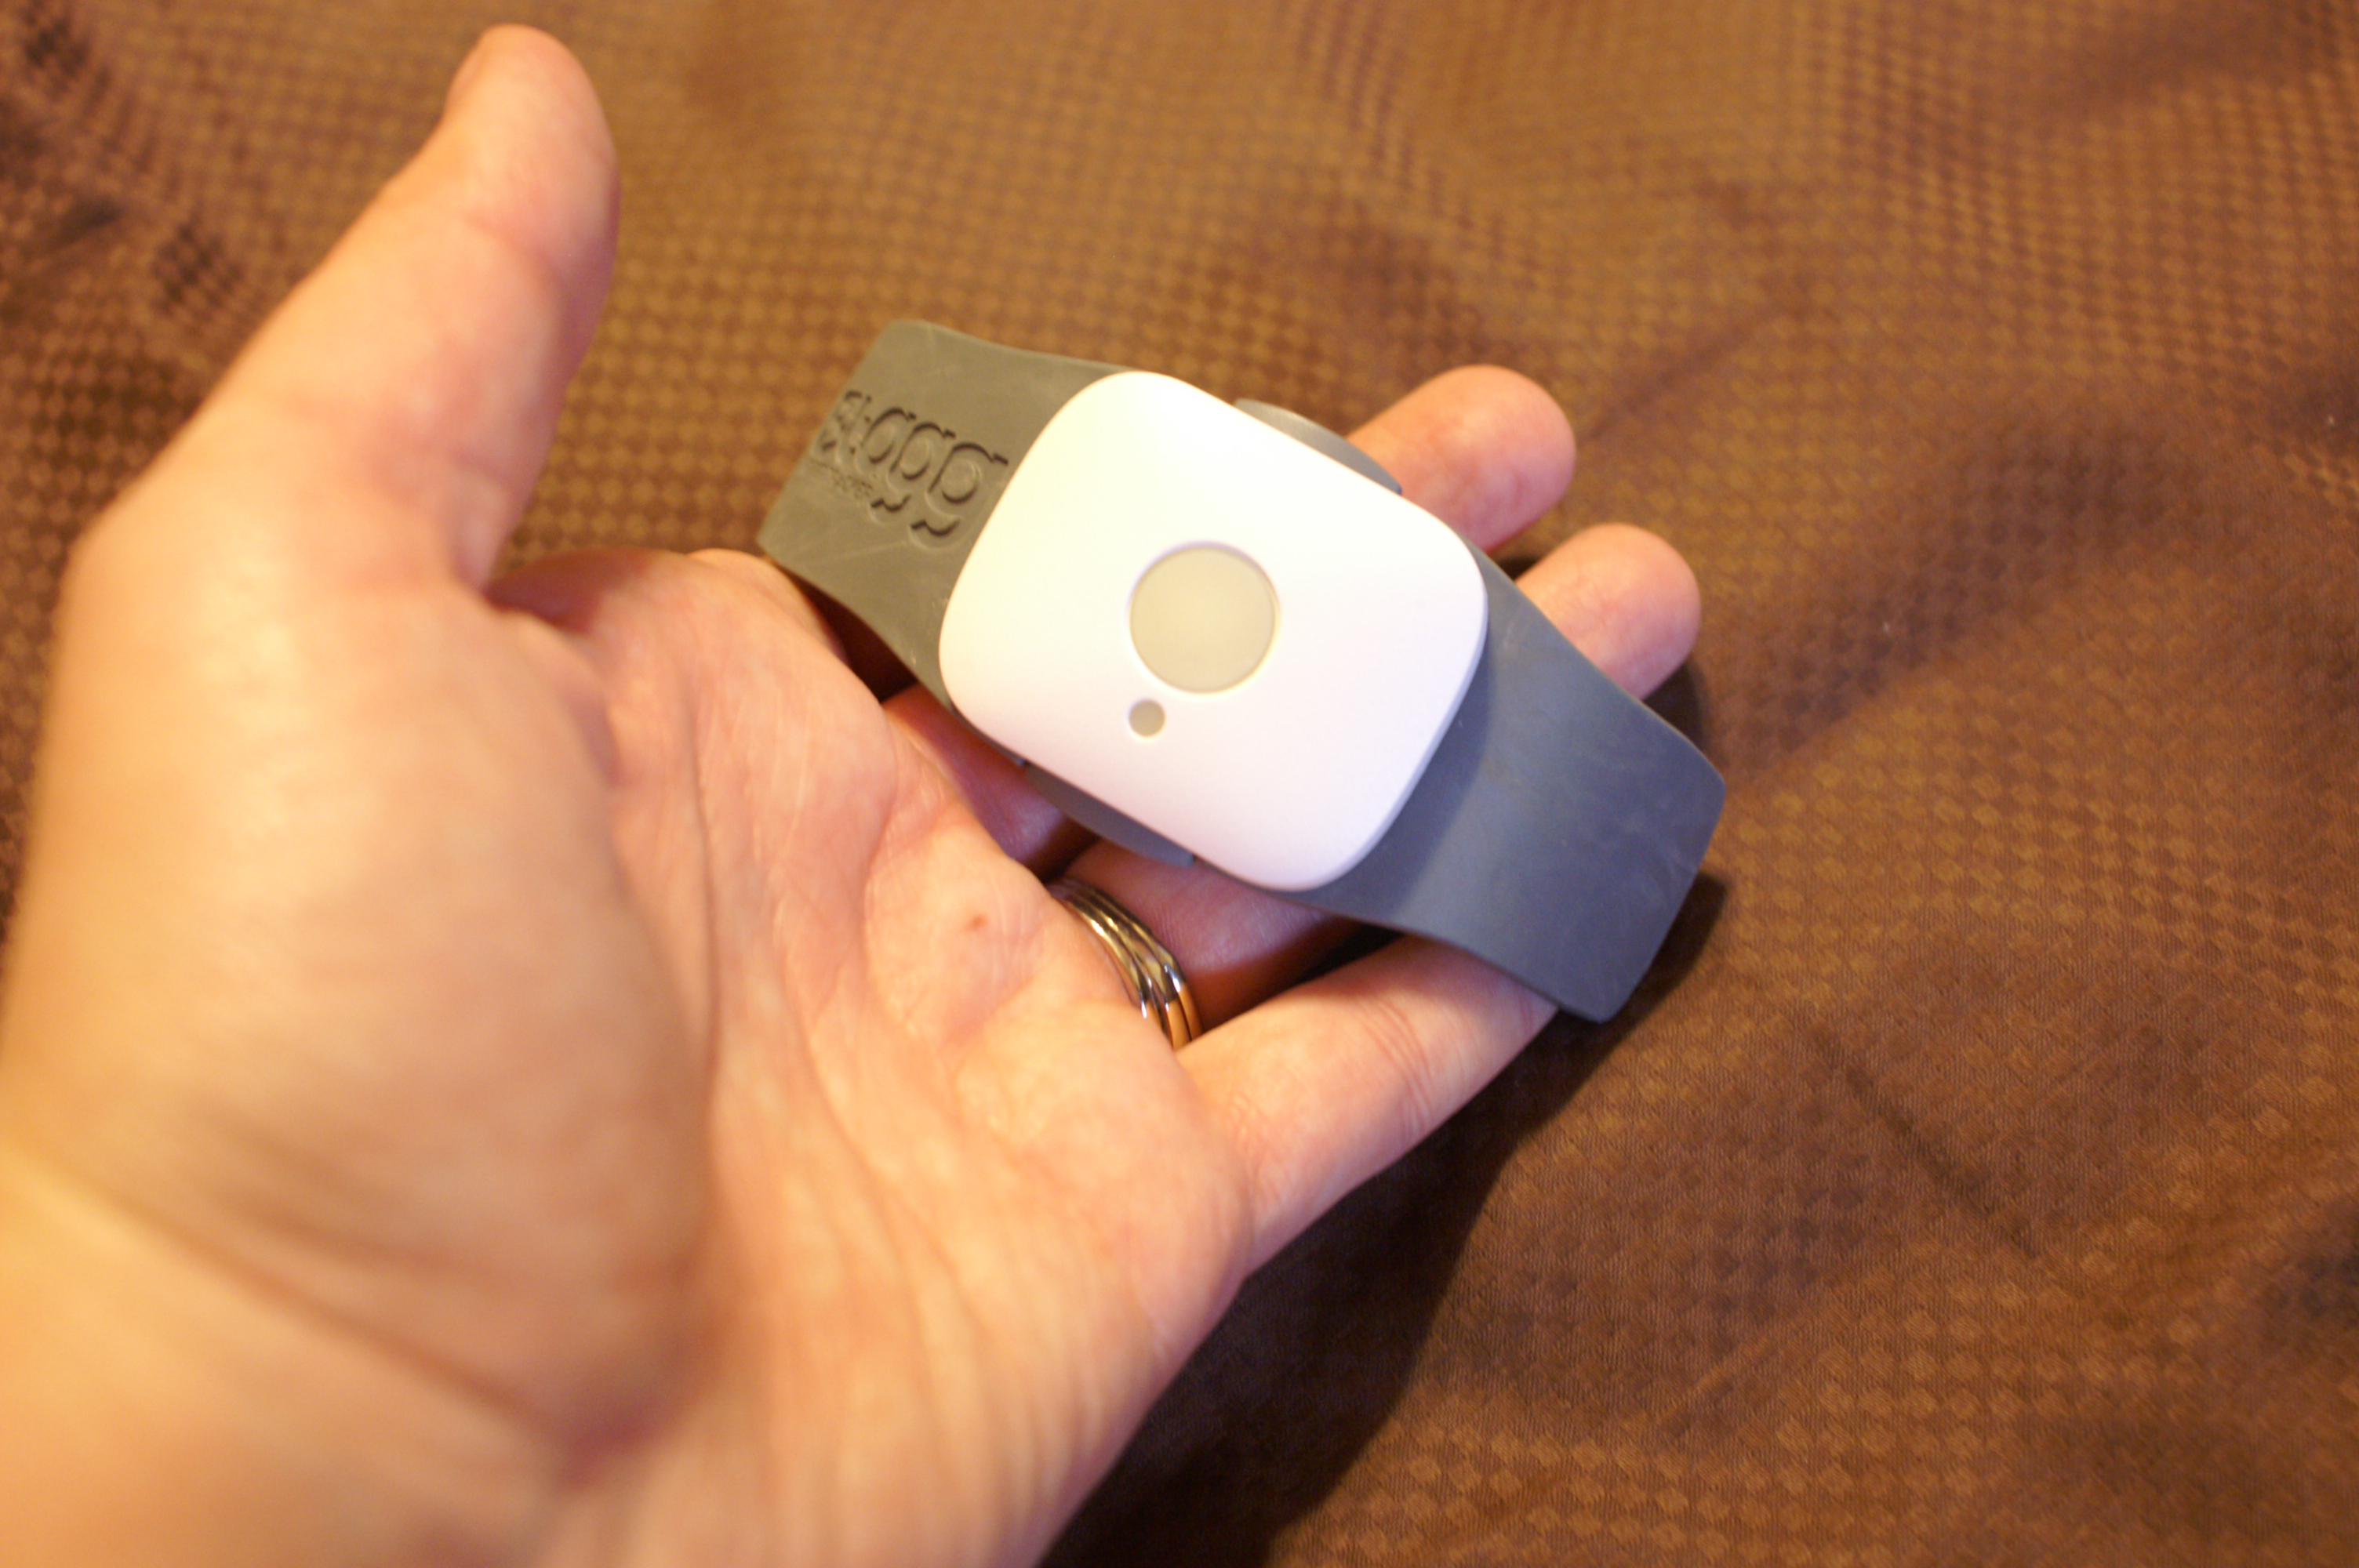 The Tagg pet tracker sensor that goes on the pet.